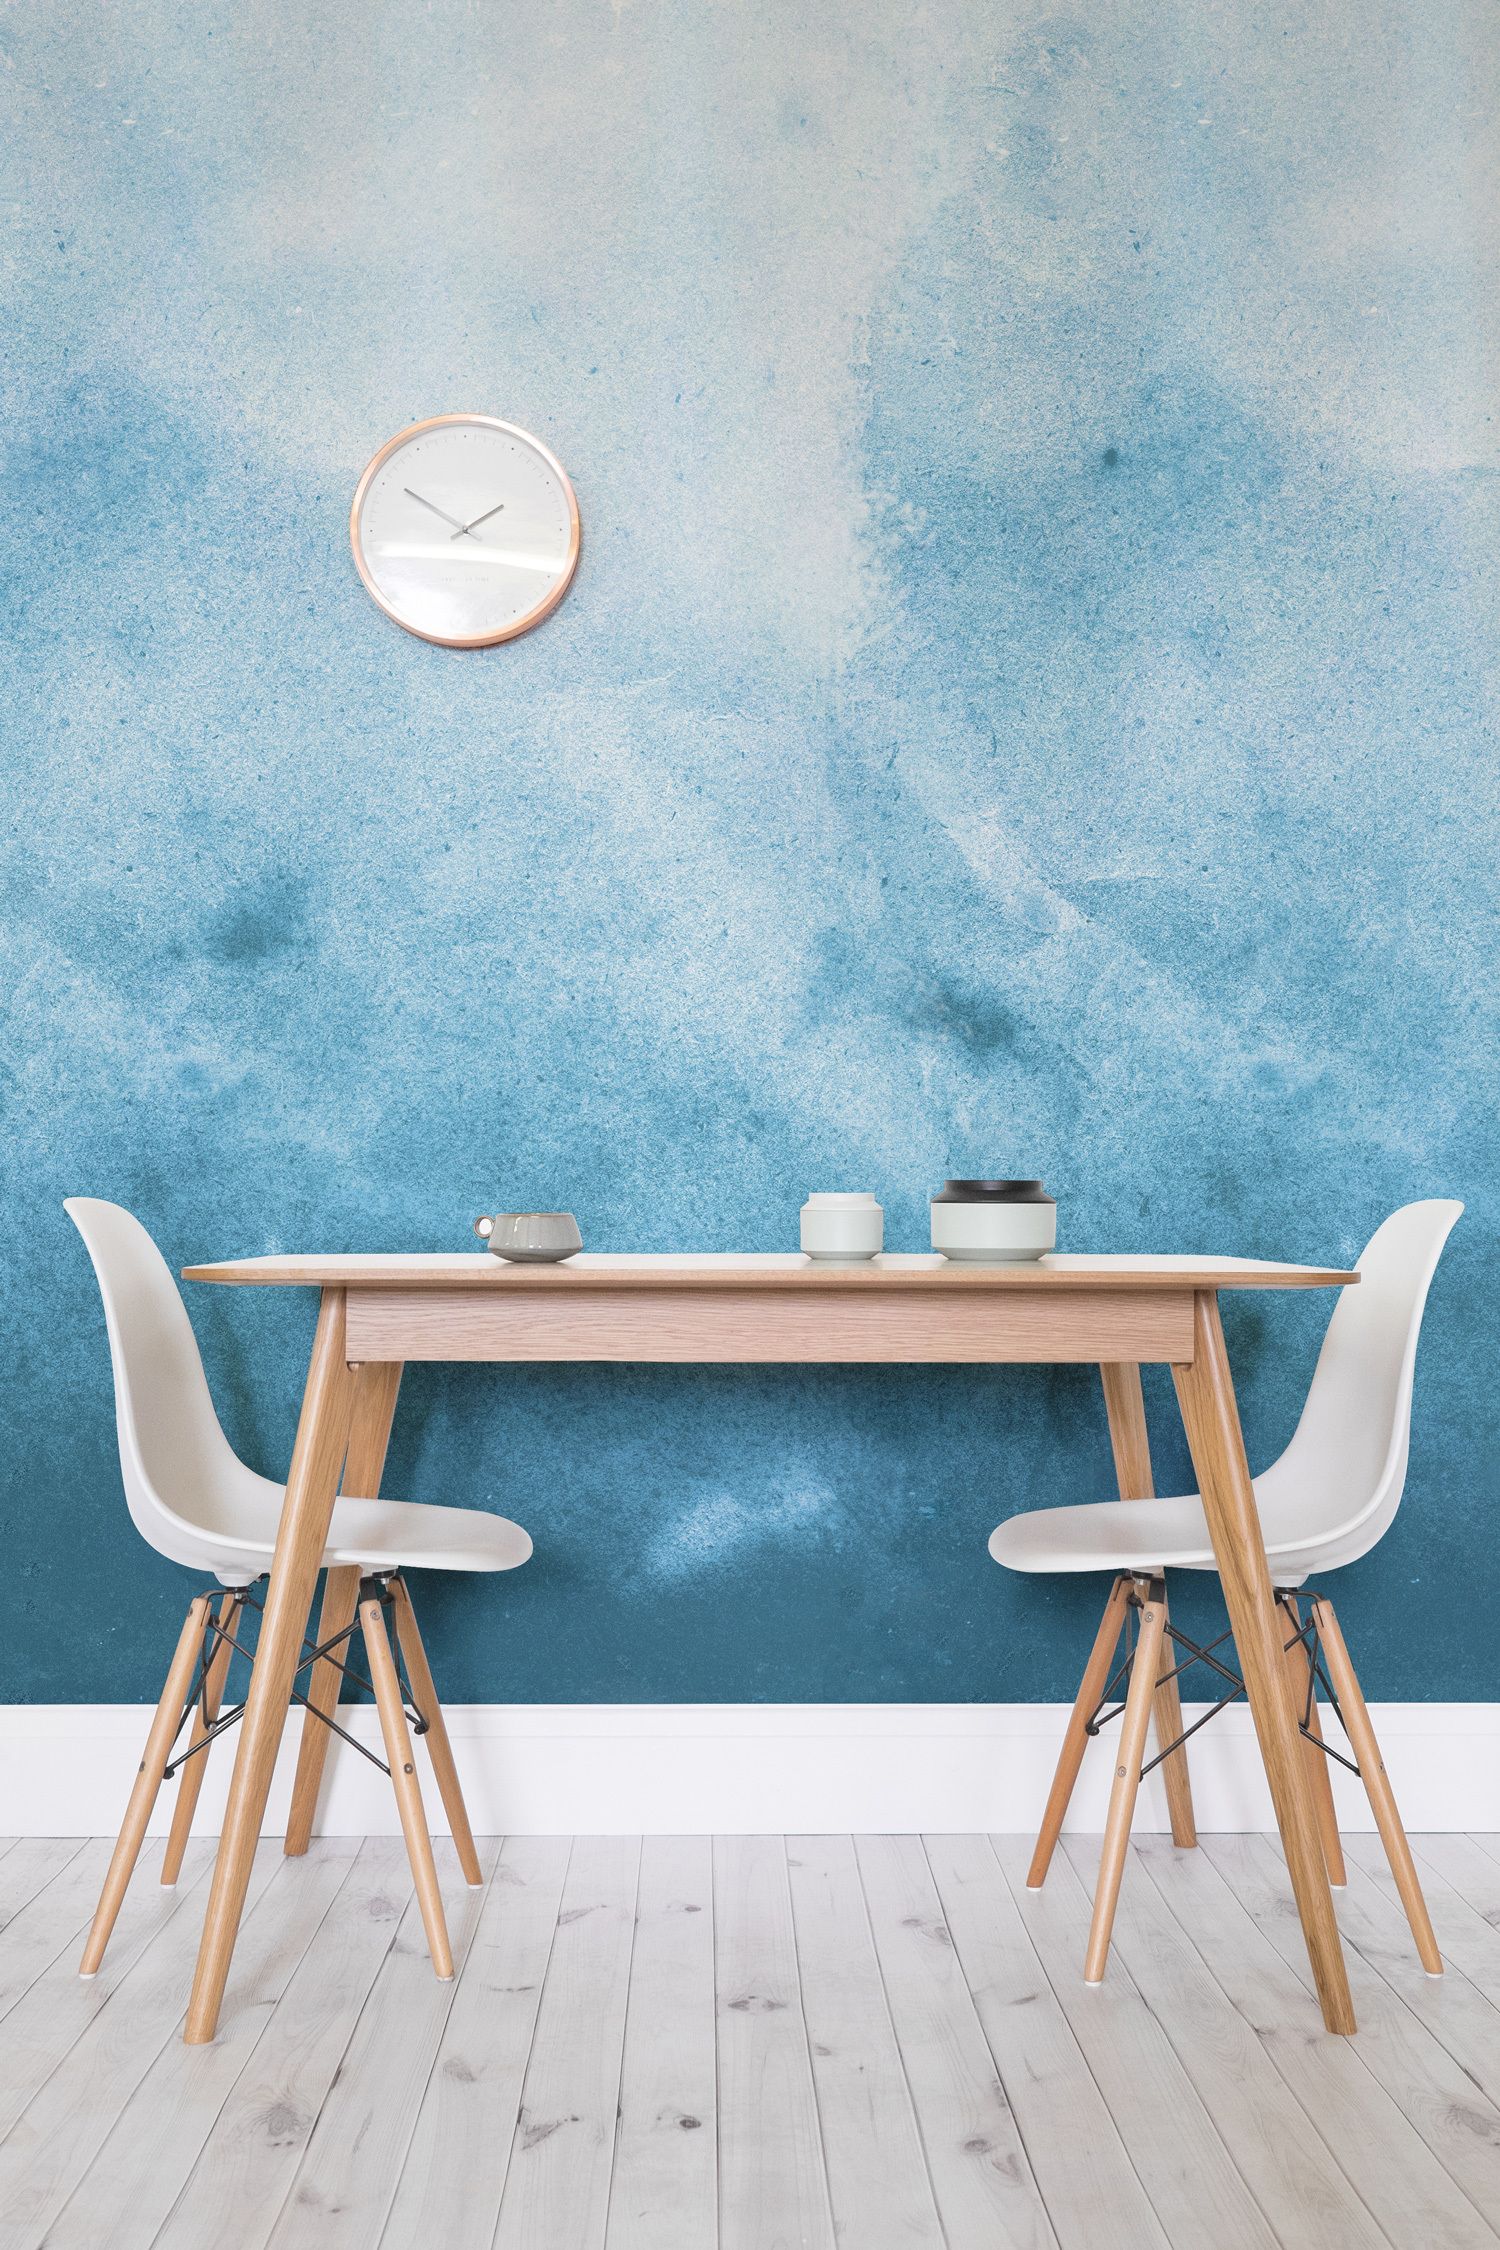 watercolor wallpaper for walls,furniture,blue,table,wall,room